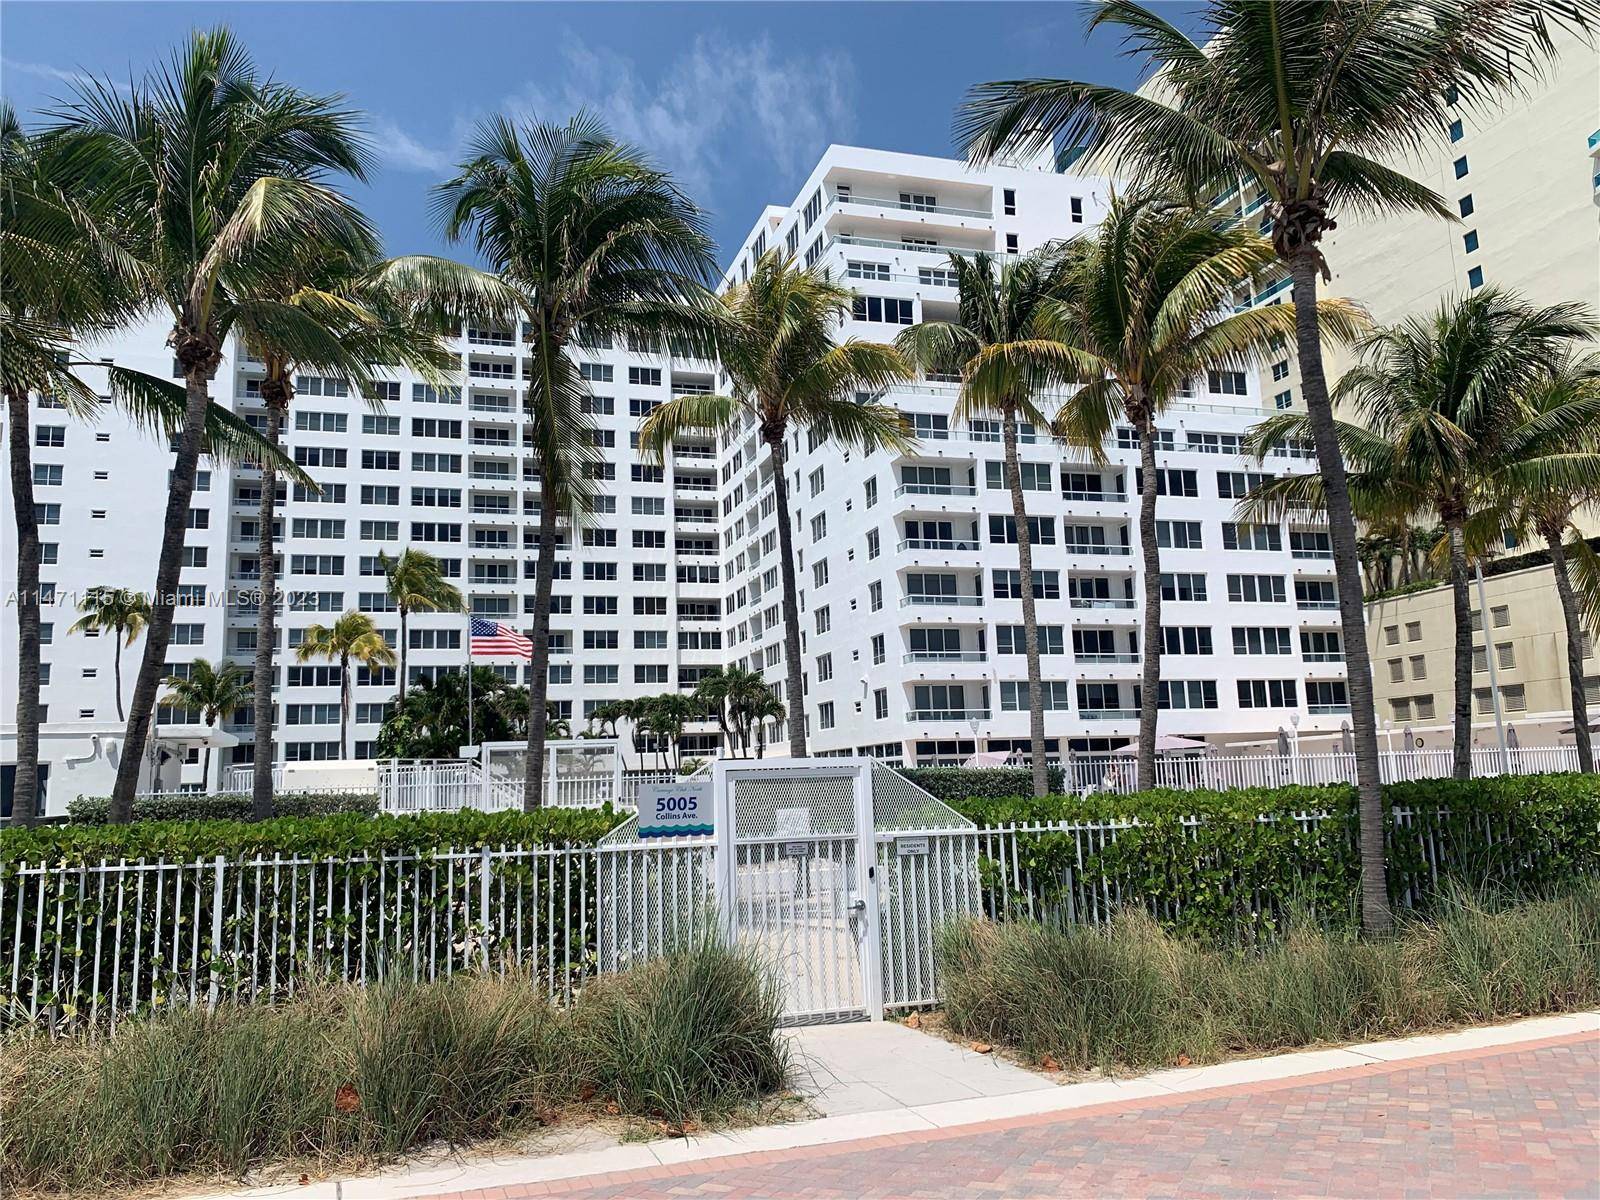 DRASTICALLY REDUCED ! Experience both the serene sounds of the ocean and the vibrant energy of the city, living uninterrupted in the heart of Miami Beach.